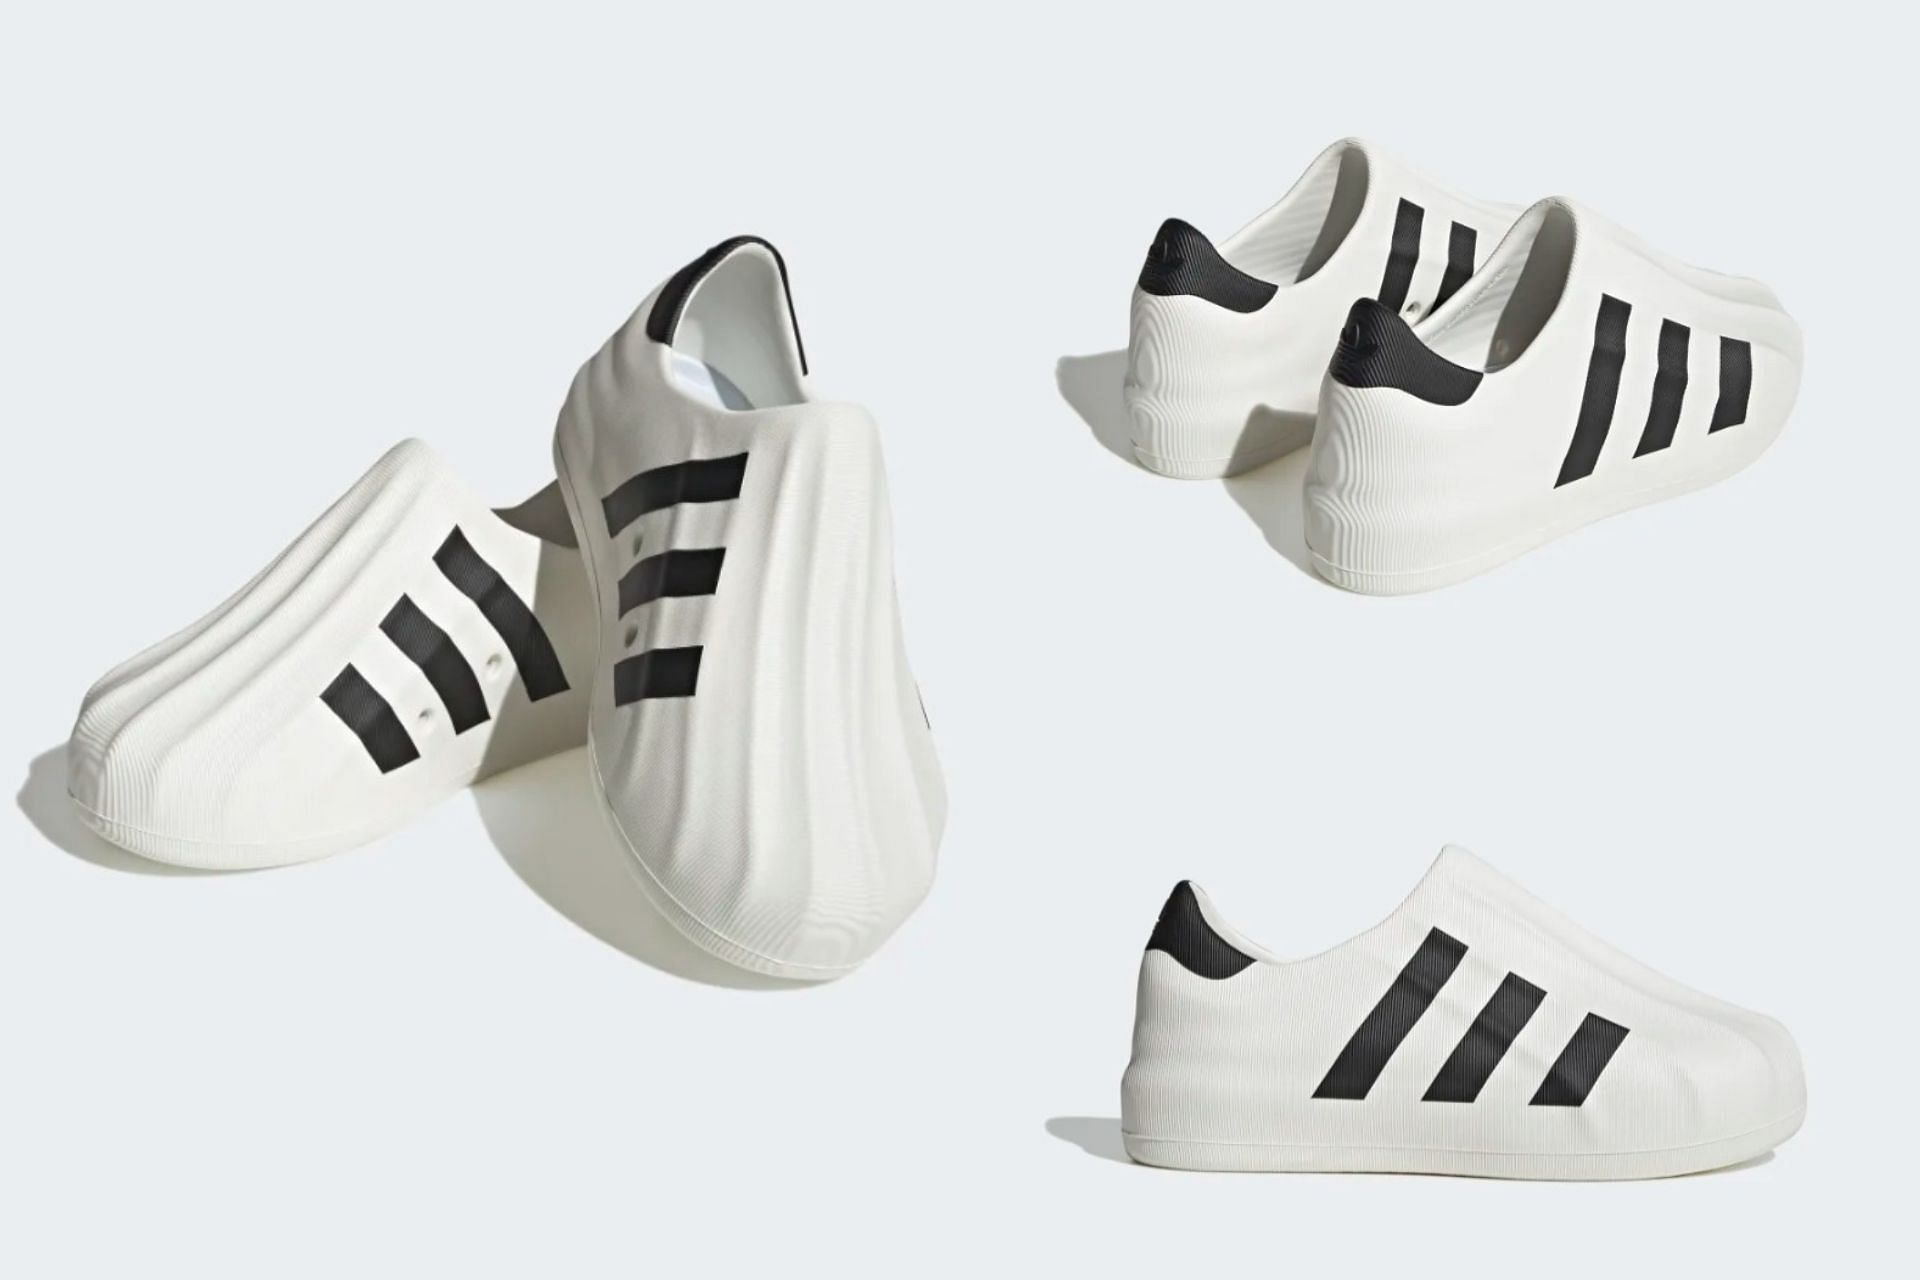 Increíble pausa Kenia Adidas Adifom Superstar shoes: Where to buy, price, and more details  explored